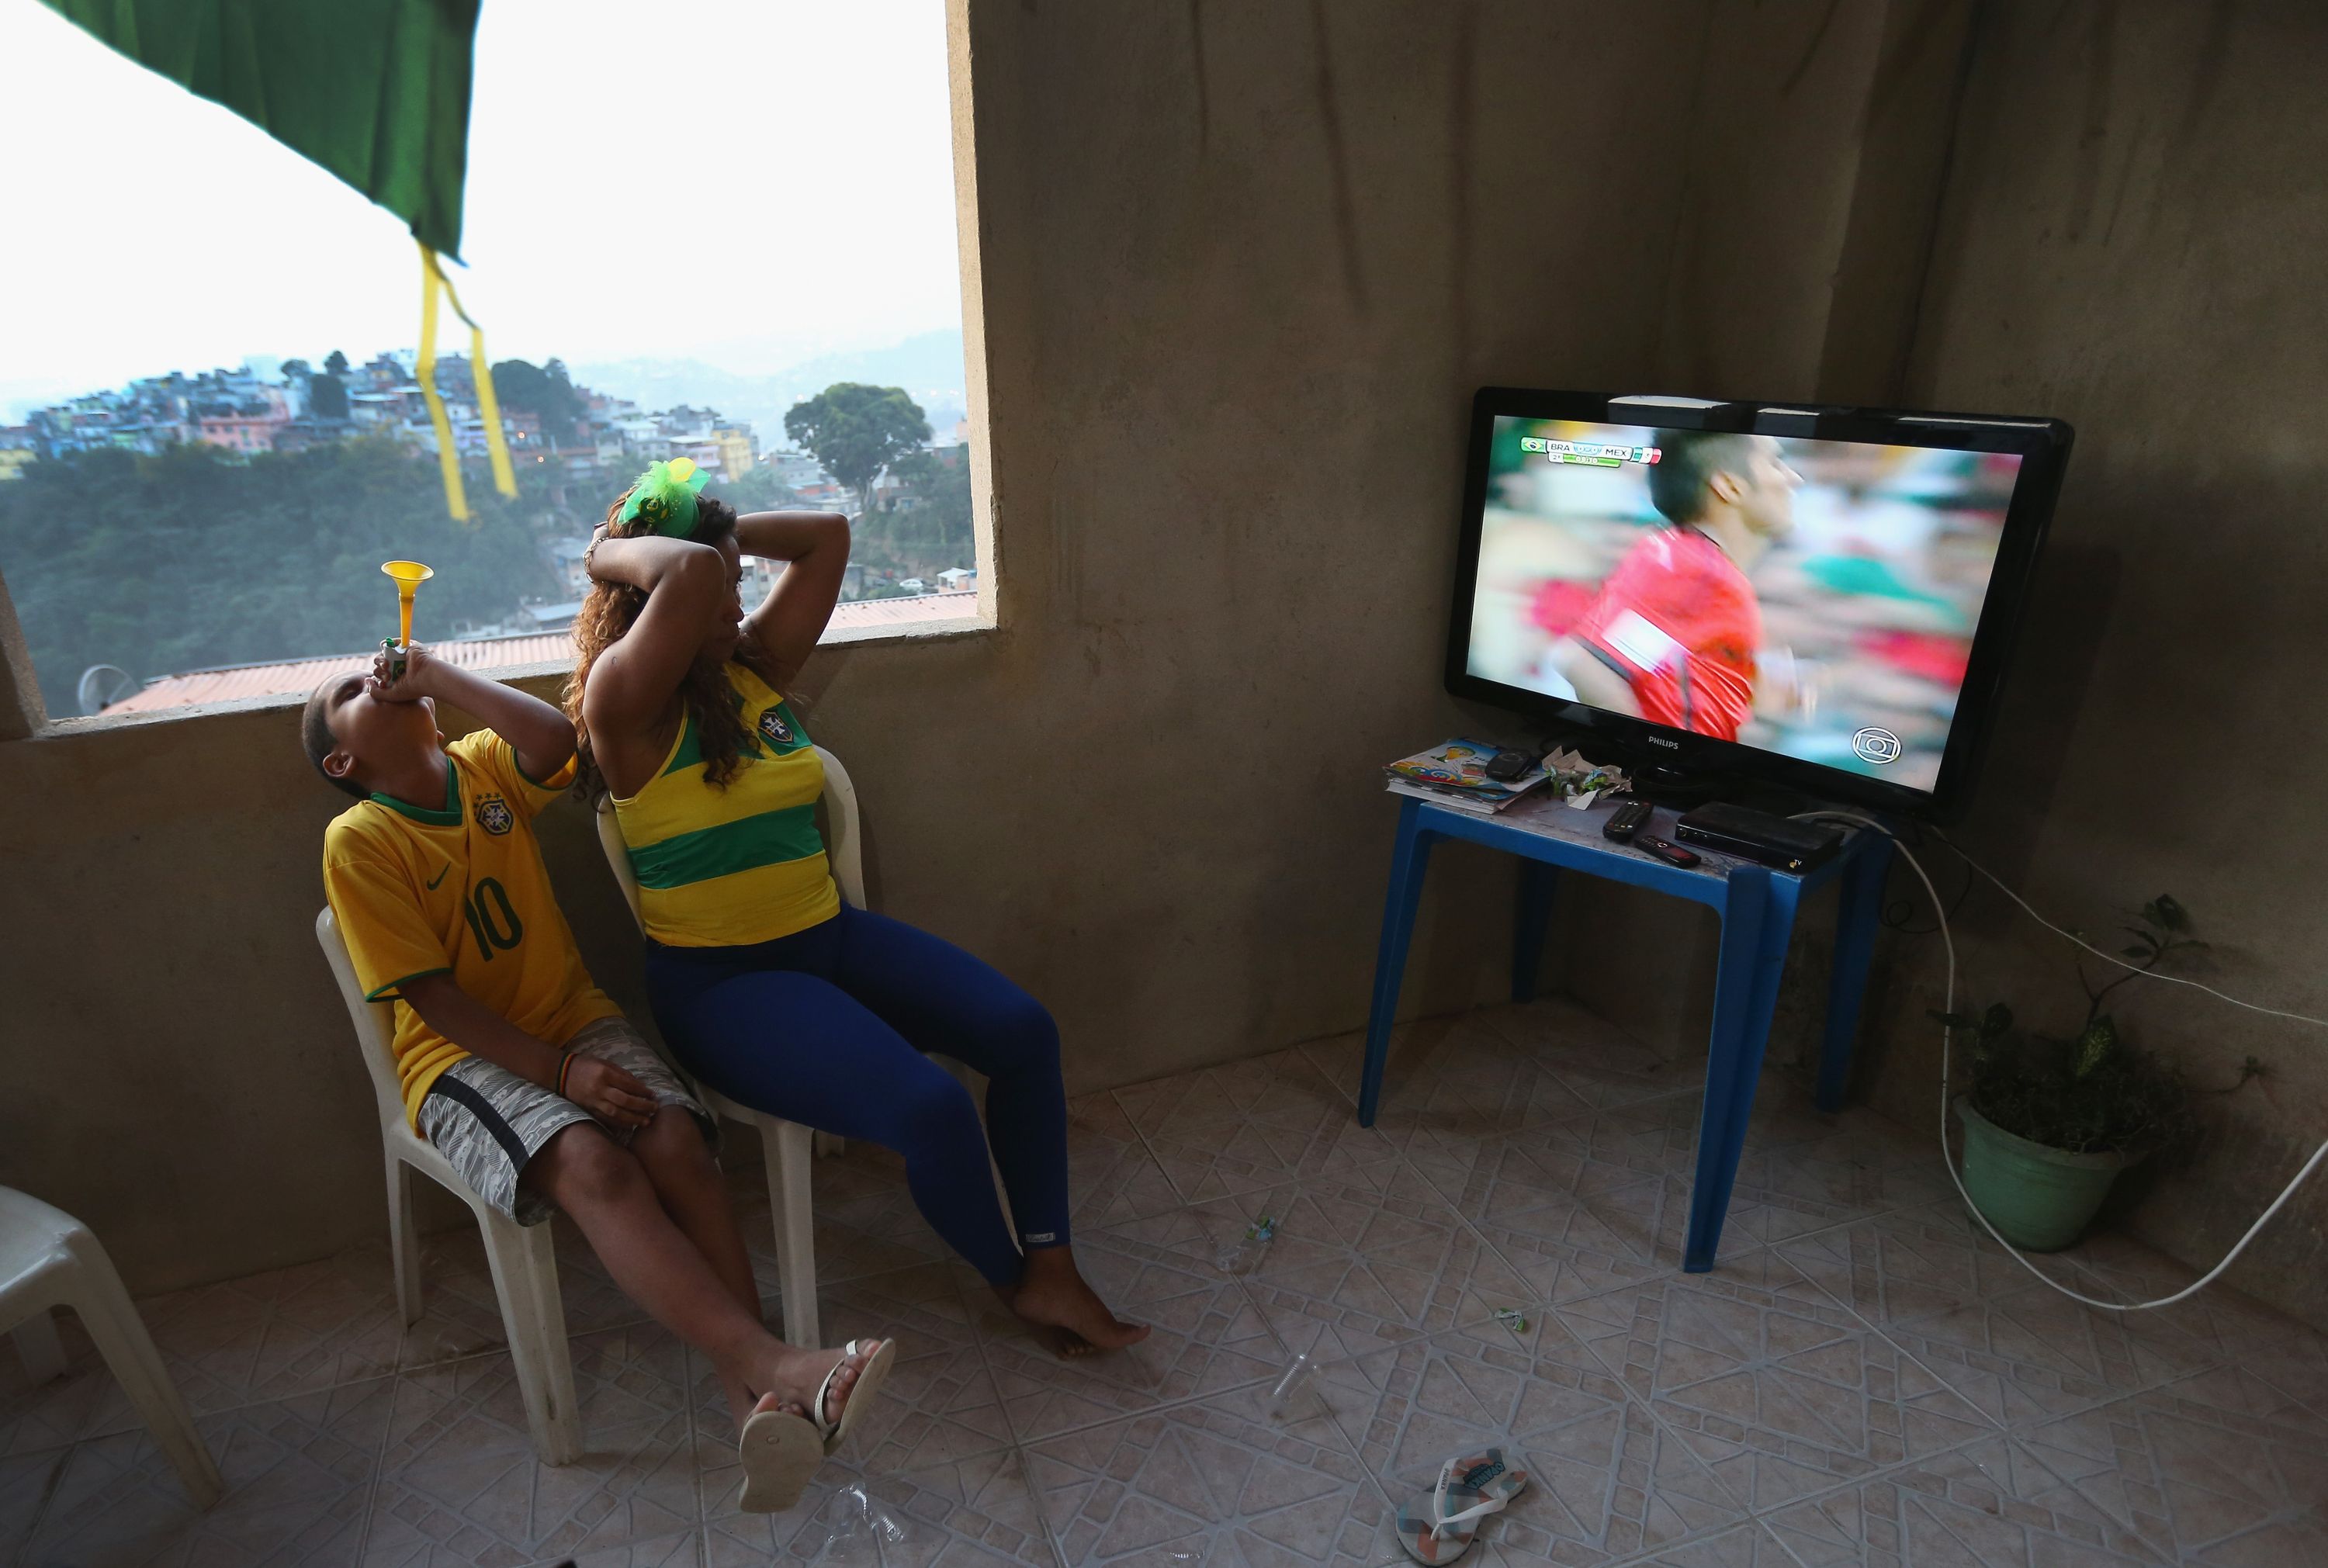 George Johnson: Favela residents resist money to relocate